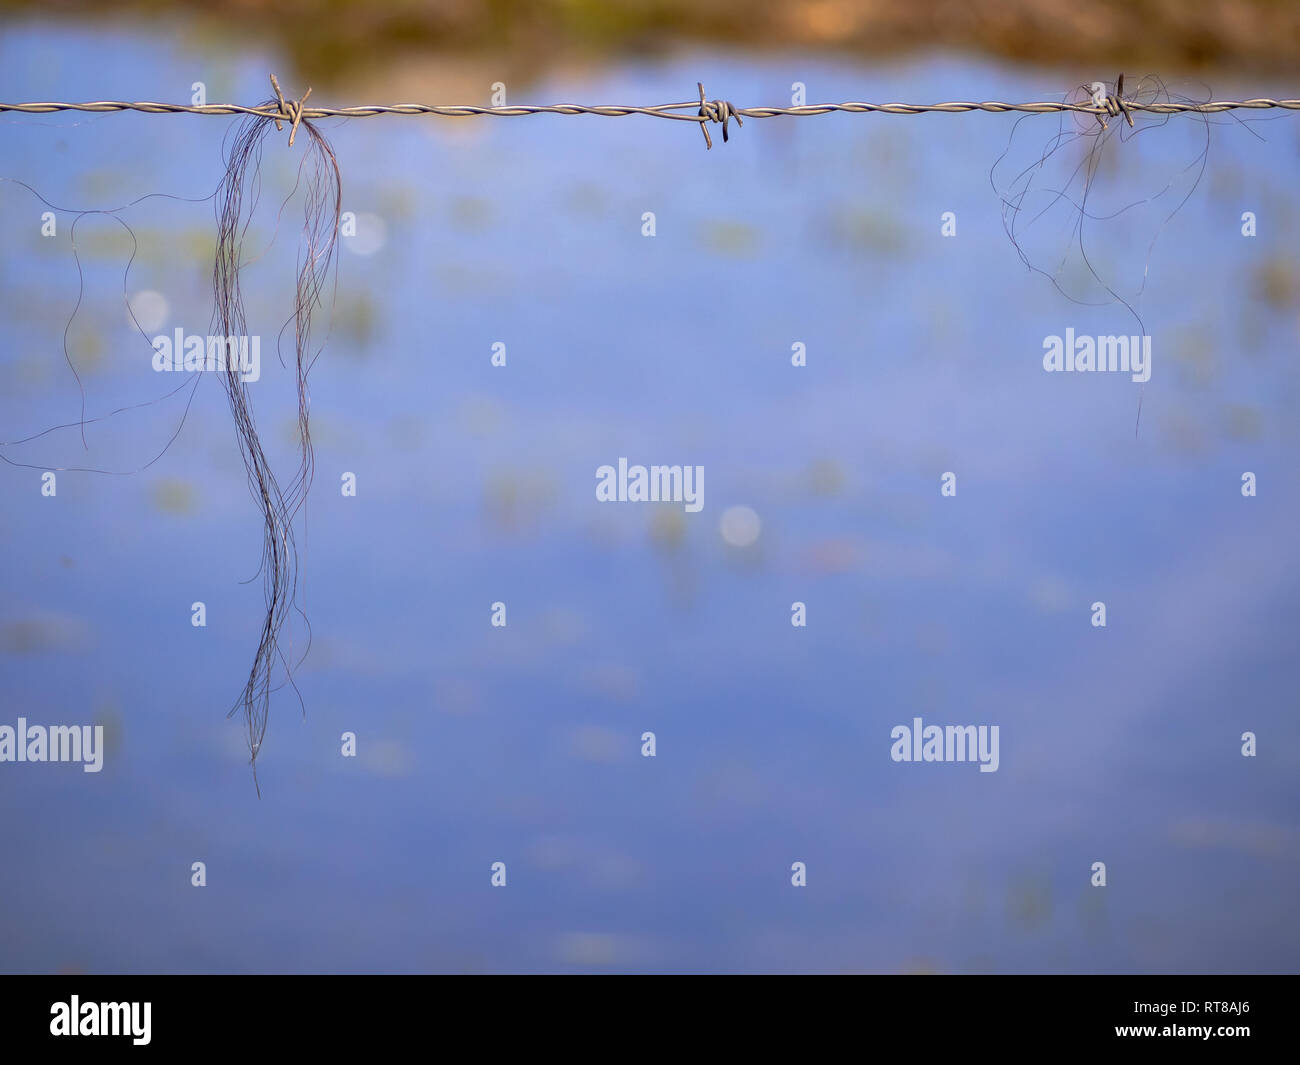 Abstract background. Animal hair on a rusty barbed wire Stock Photo